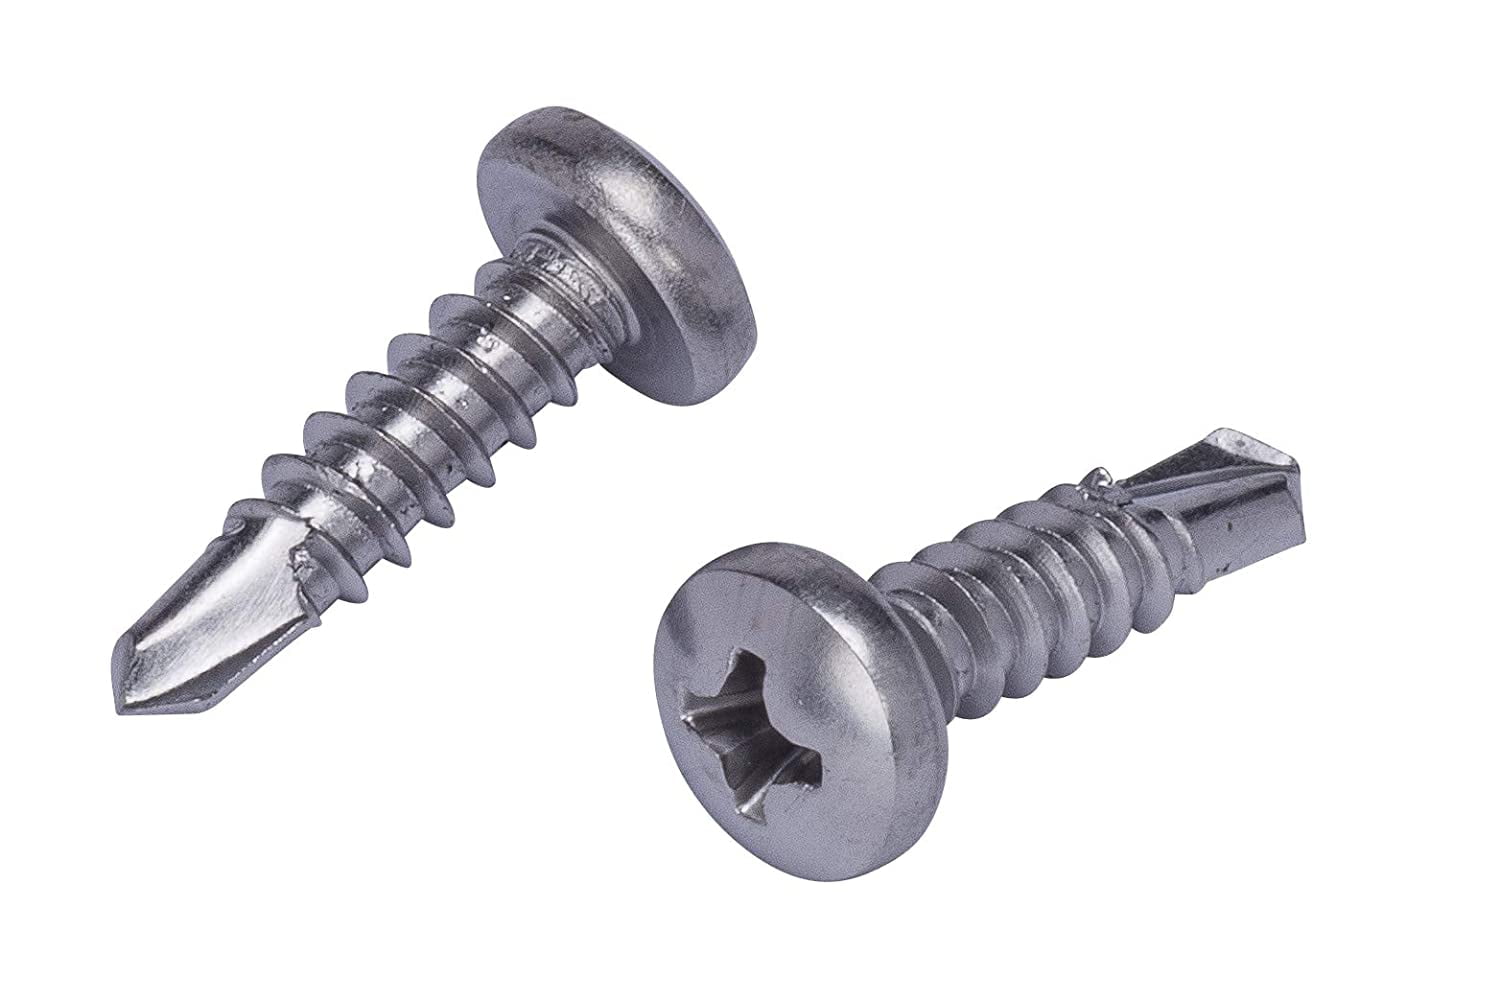 25 lbs 2800 Pcs # 8 X 2 Hex Washer Head Self Tapping screw free shipping 